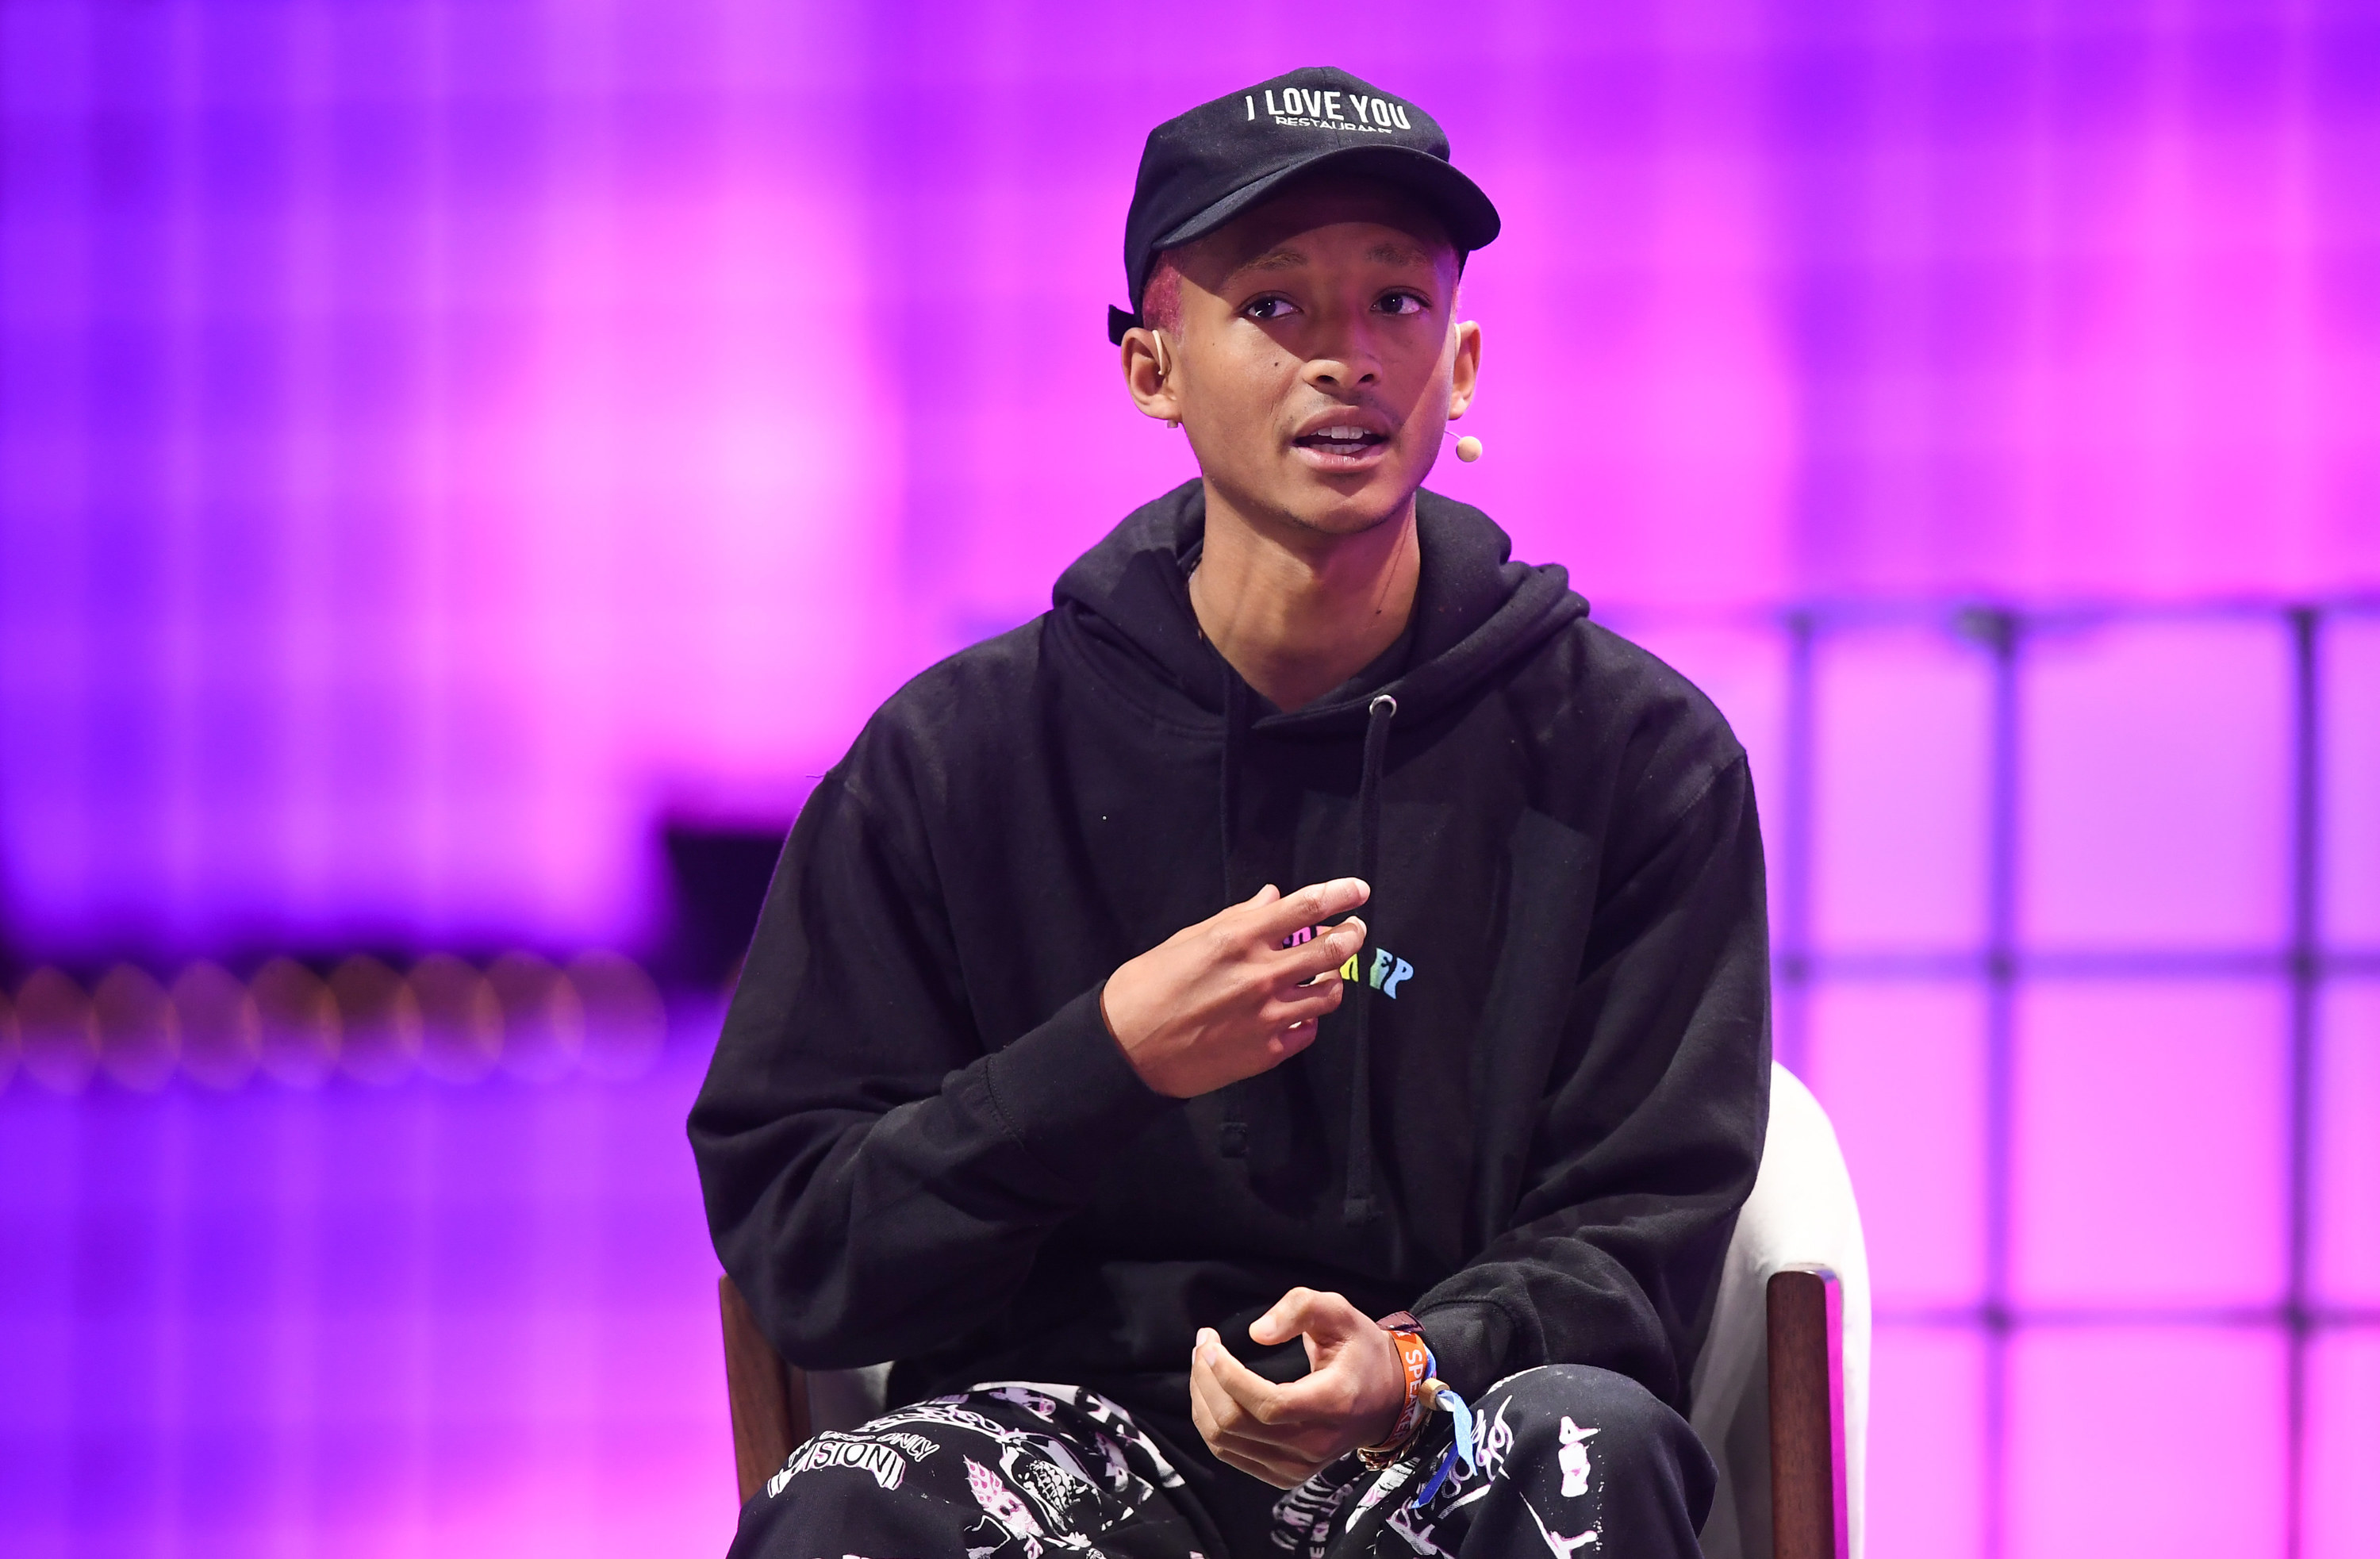 Jaden Smith, 15, believes 'more intelligent society' would exist